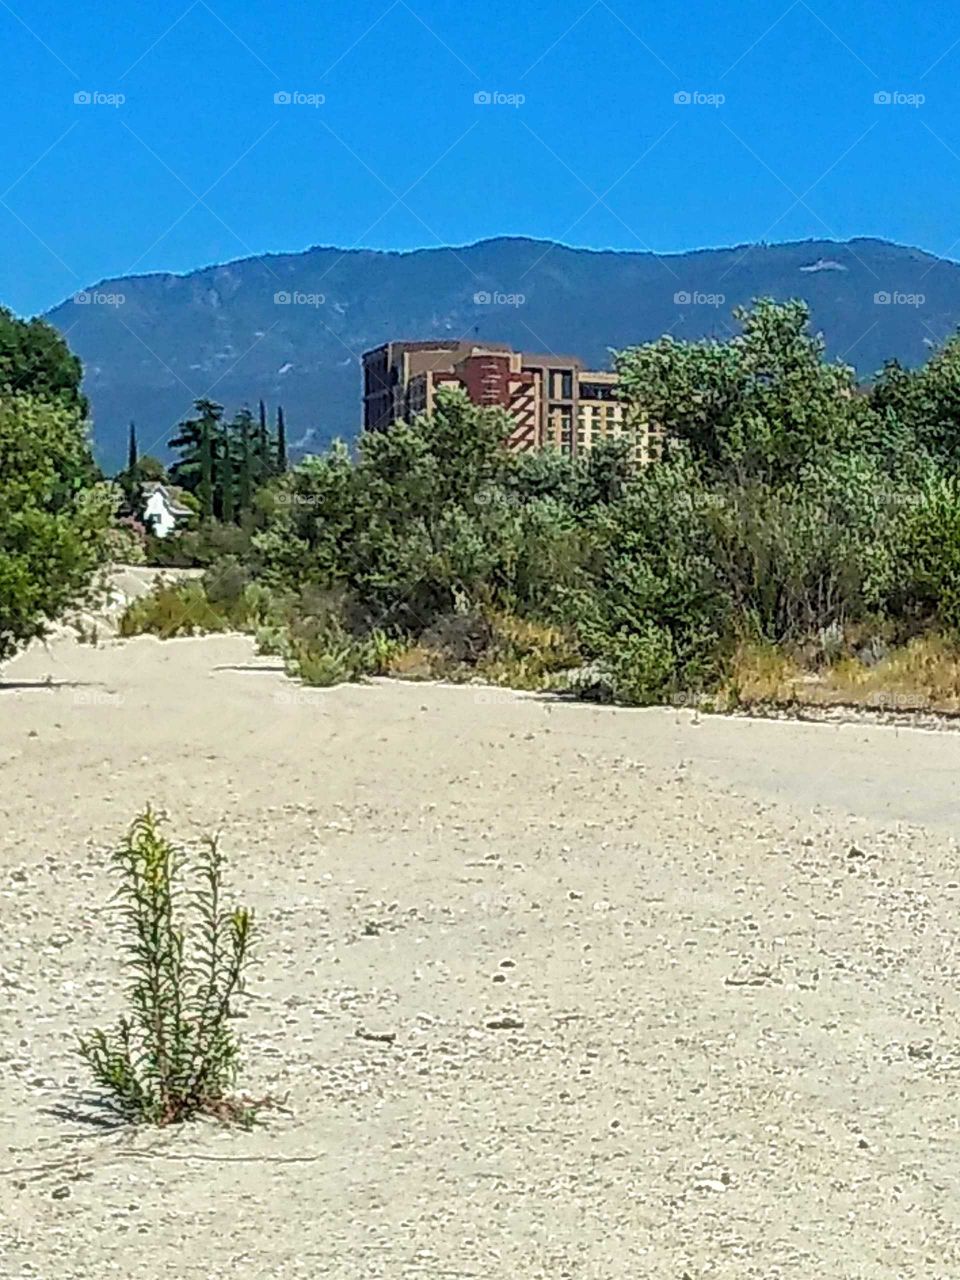 walking on back Trail in California came across this beautiful scenery Pechanga casino and the mountain in back